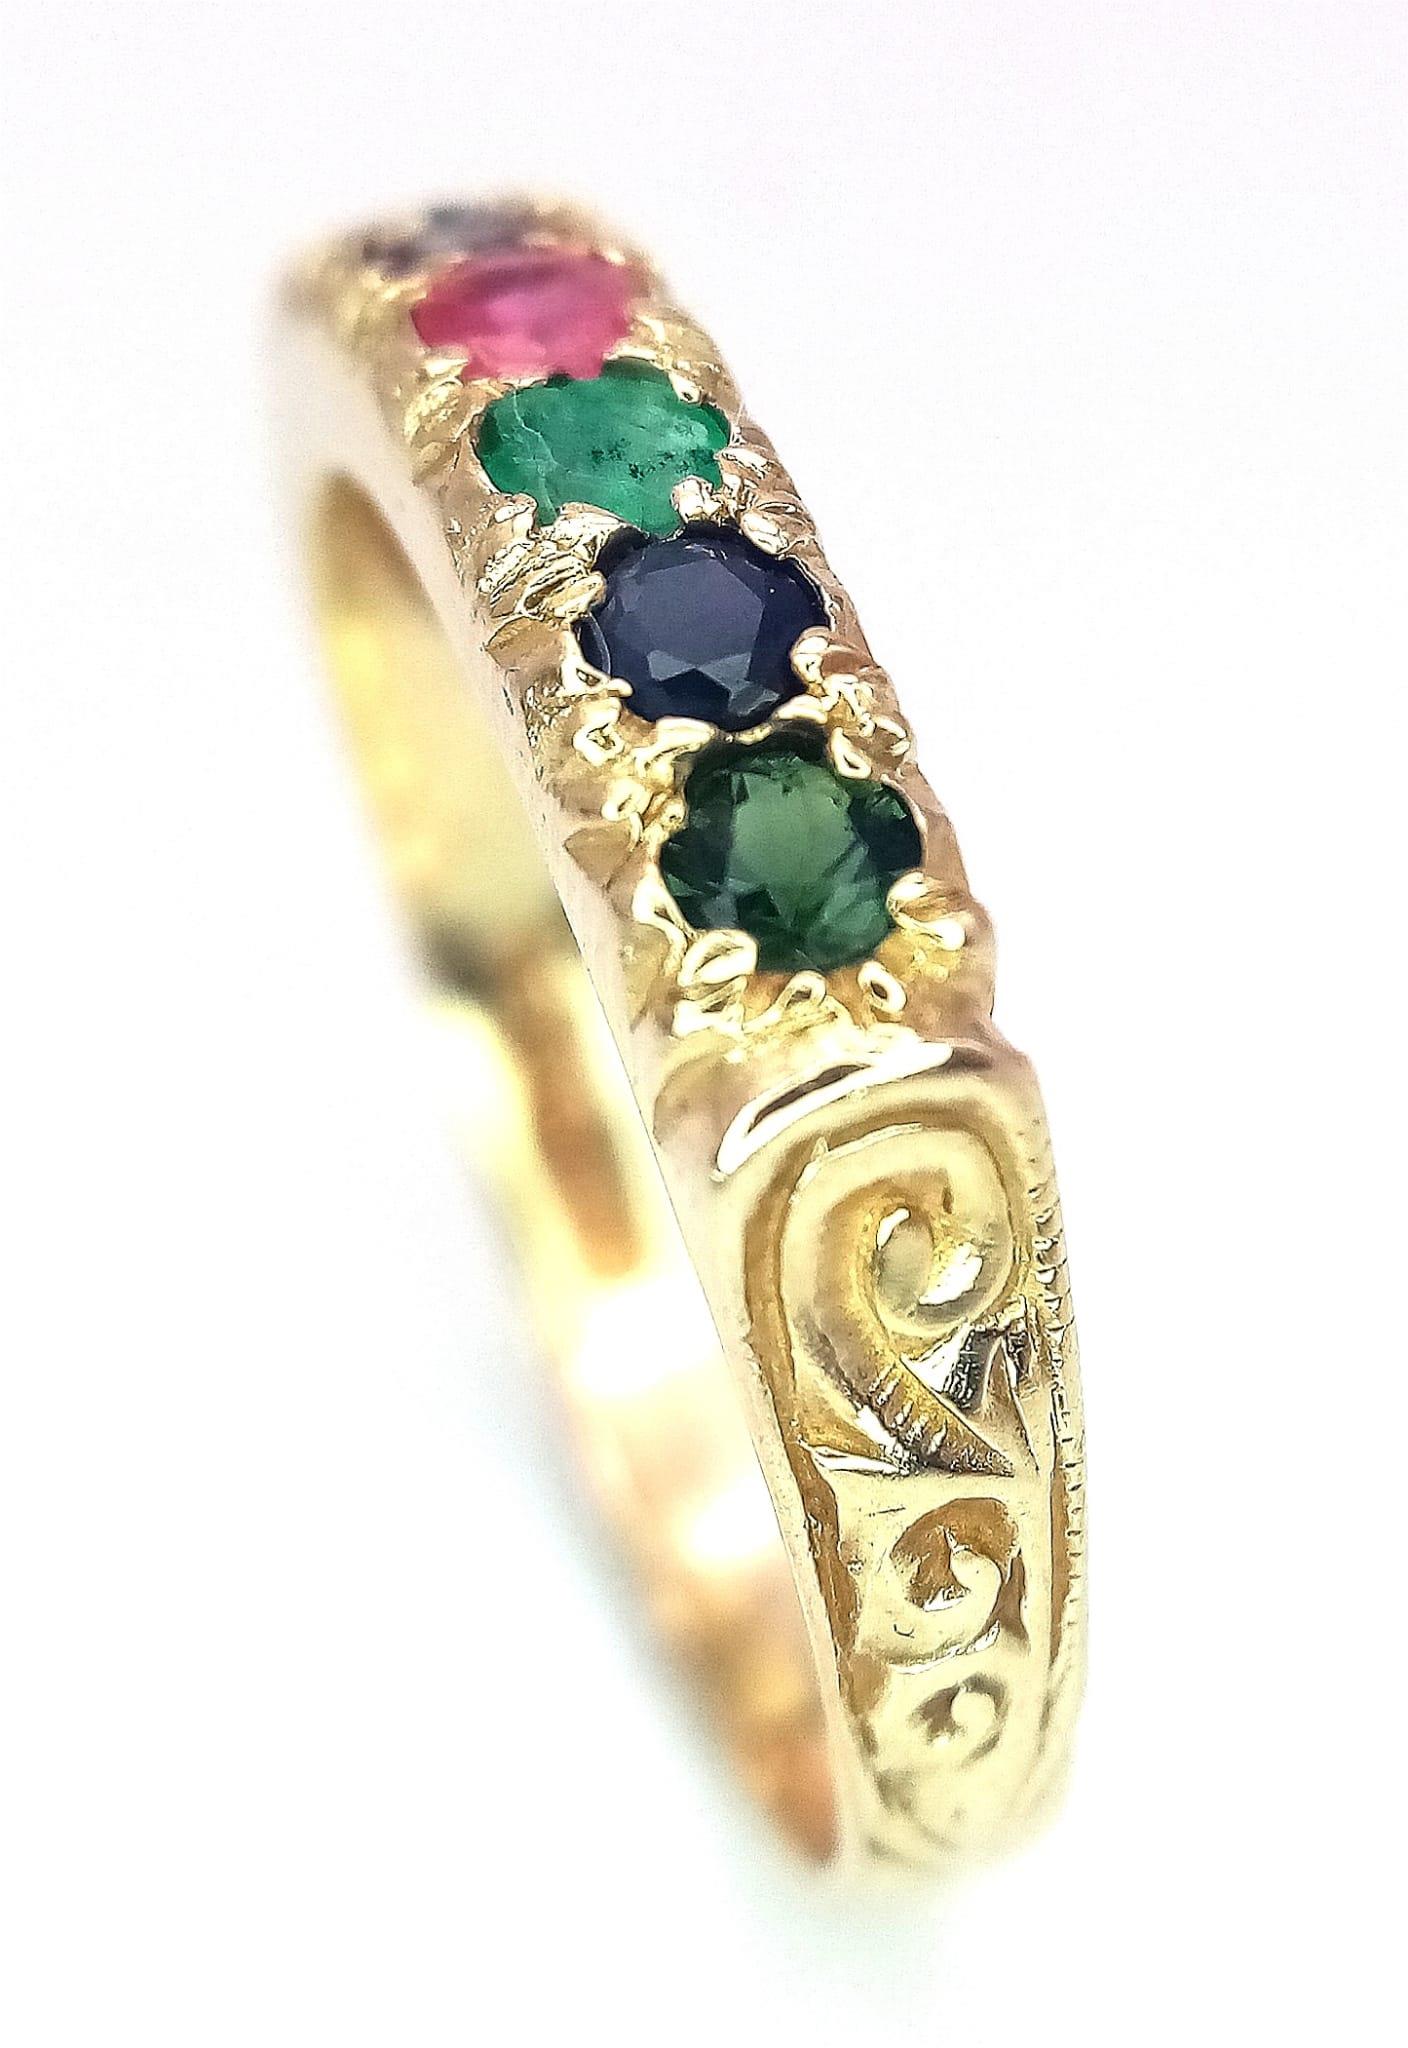 A PRETTY 9K YELLOW GOLD MULTI GEMSTONES SET DEAREST RING, WEIGHT 2.9G SIZE S - Image 7 of 11